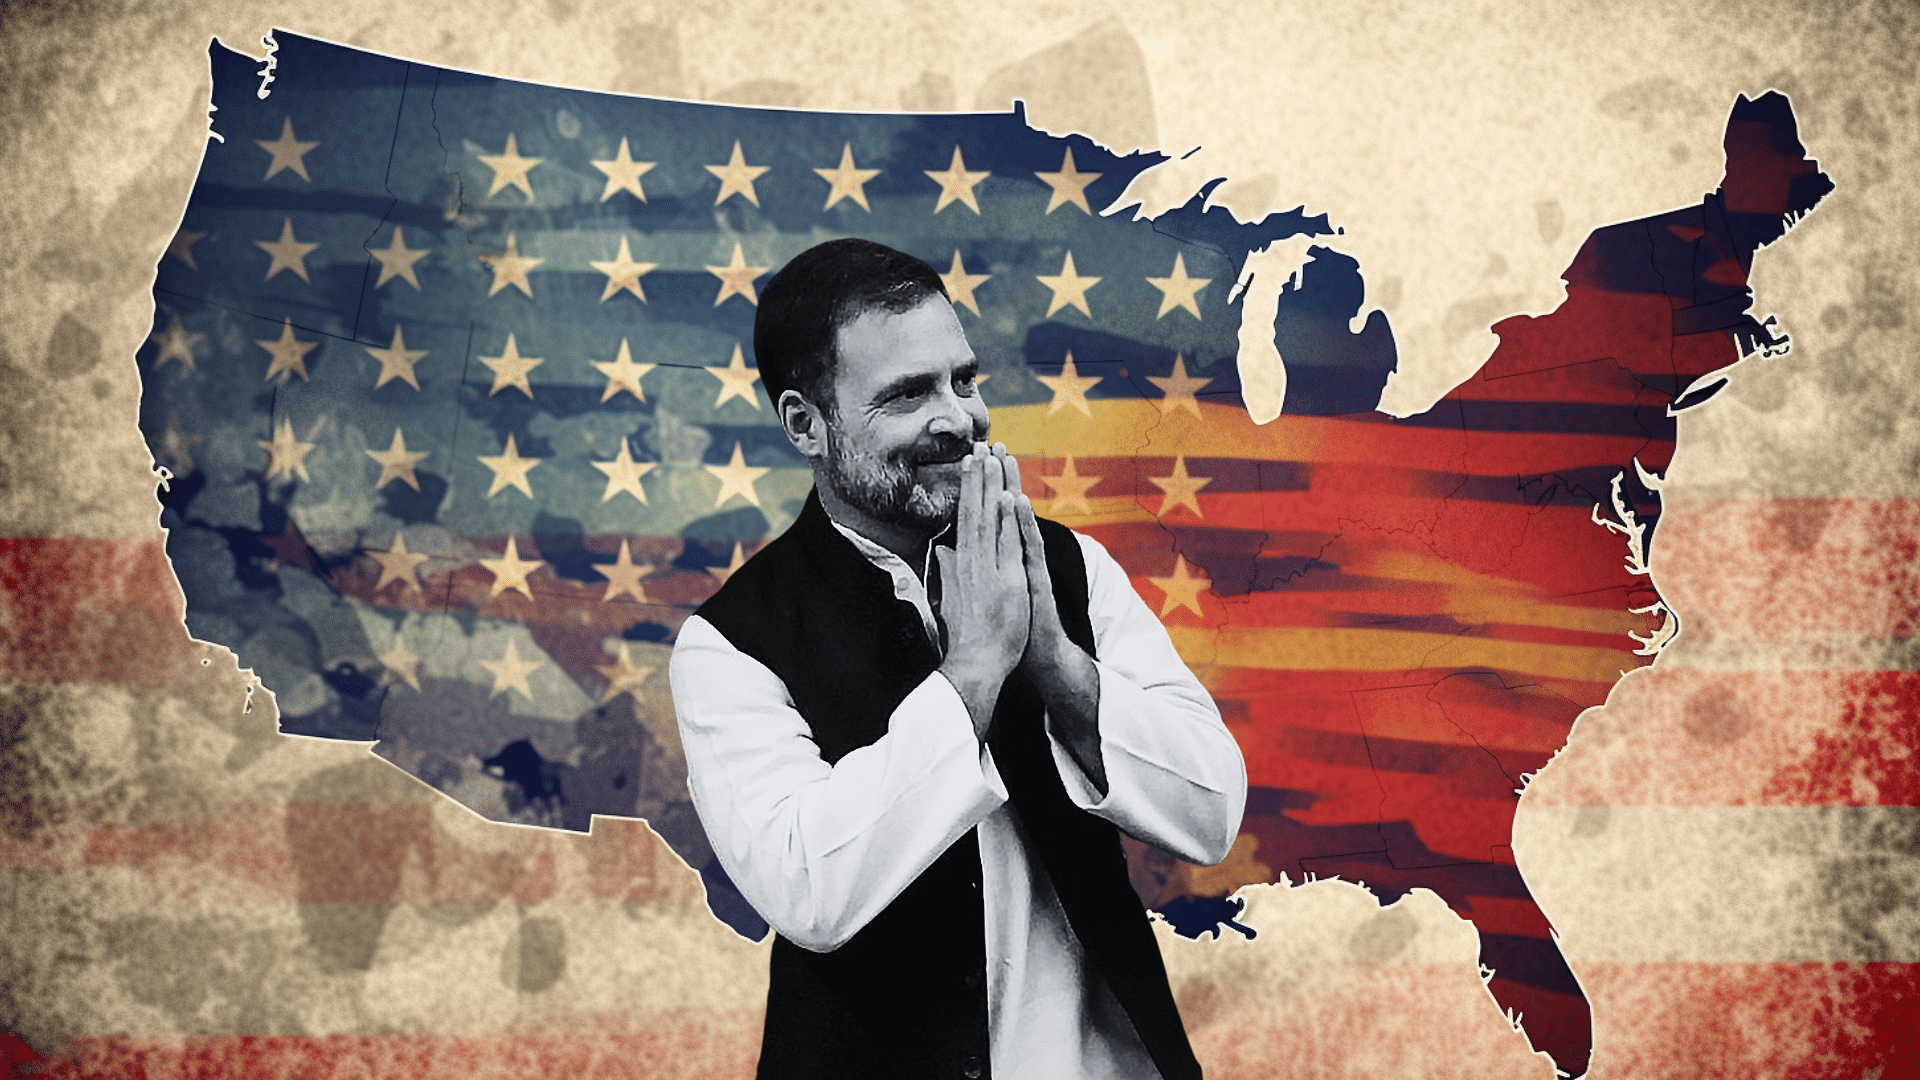 <div class="paragraphs"><p>Congress leader Rahul Gandhi wrapped up his six-day tour of the United States this week, and despite no longer holding a parliamentary position, his visit drew interest from the Indian community in the US and his critics back home in India.&nbsp;</p></div>